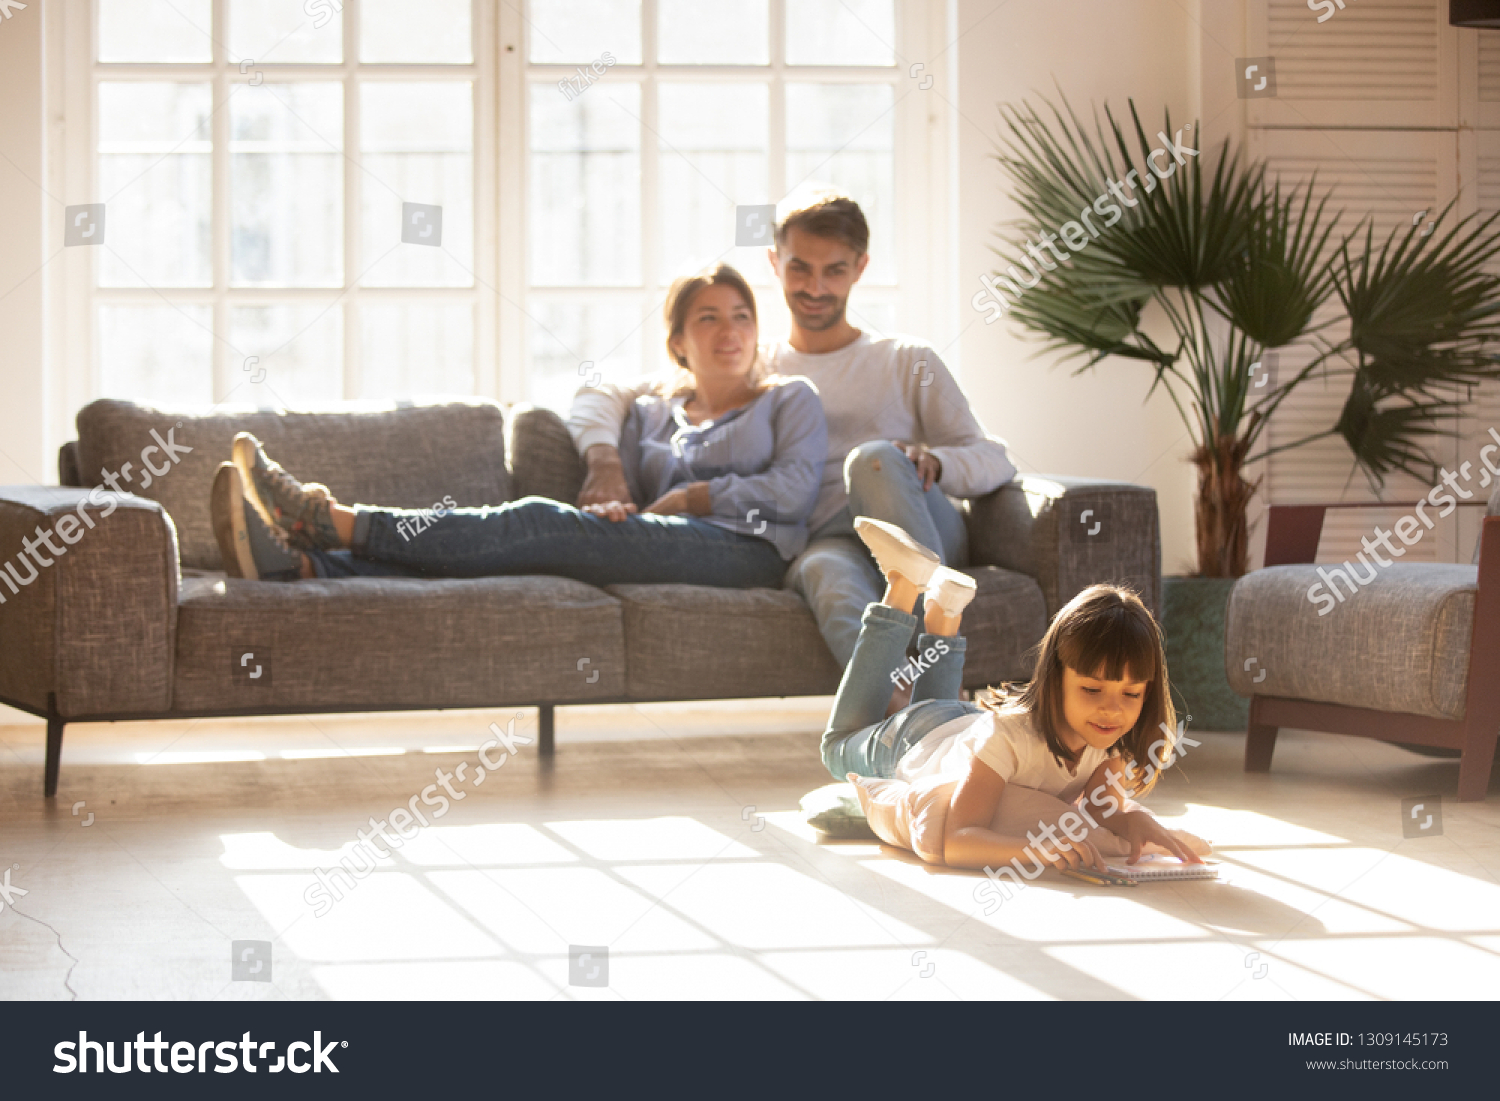 Happy parents relaxing on couch in comfort light living room while little kid child daughter playing on warm floor drawing with colored pencils, family having fun together, underfloor heating concept #1309145173